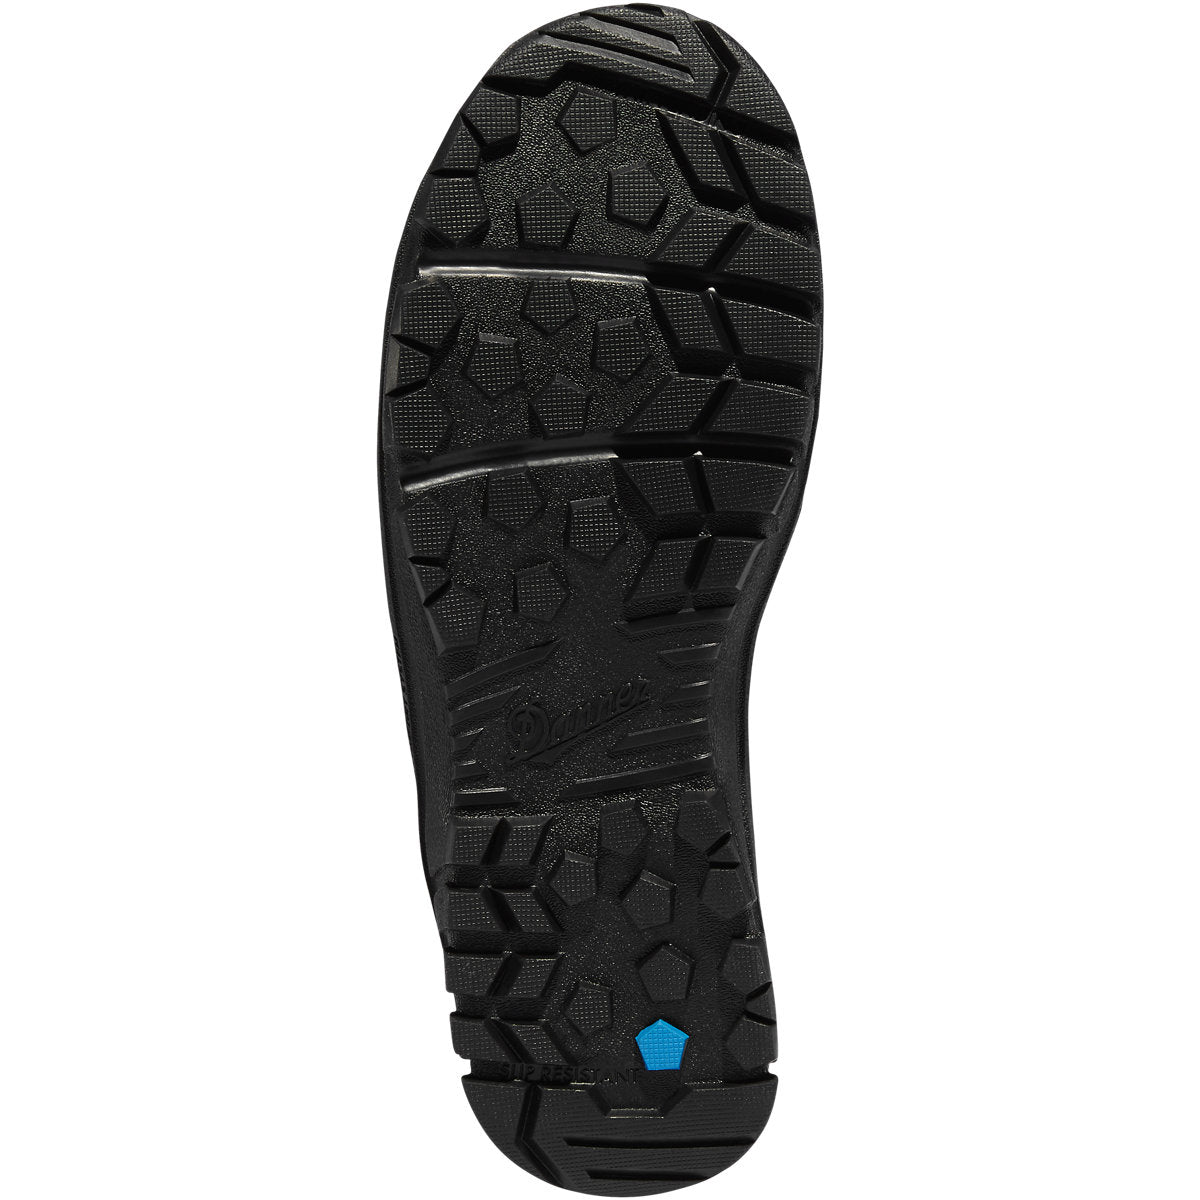 Lookout 8” Insulated (800g) Winter Boot